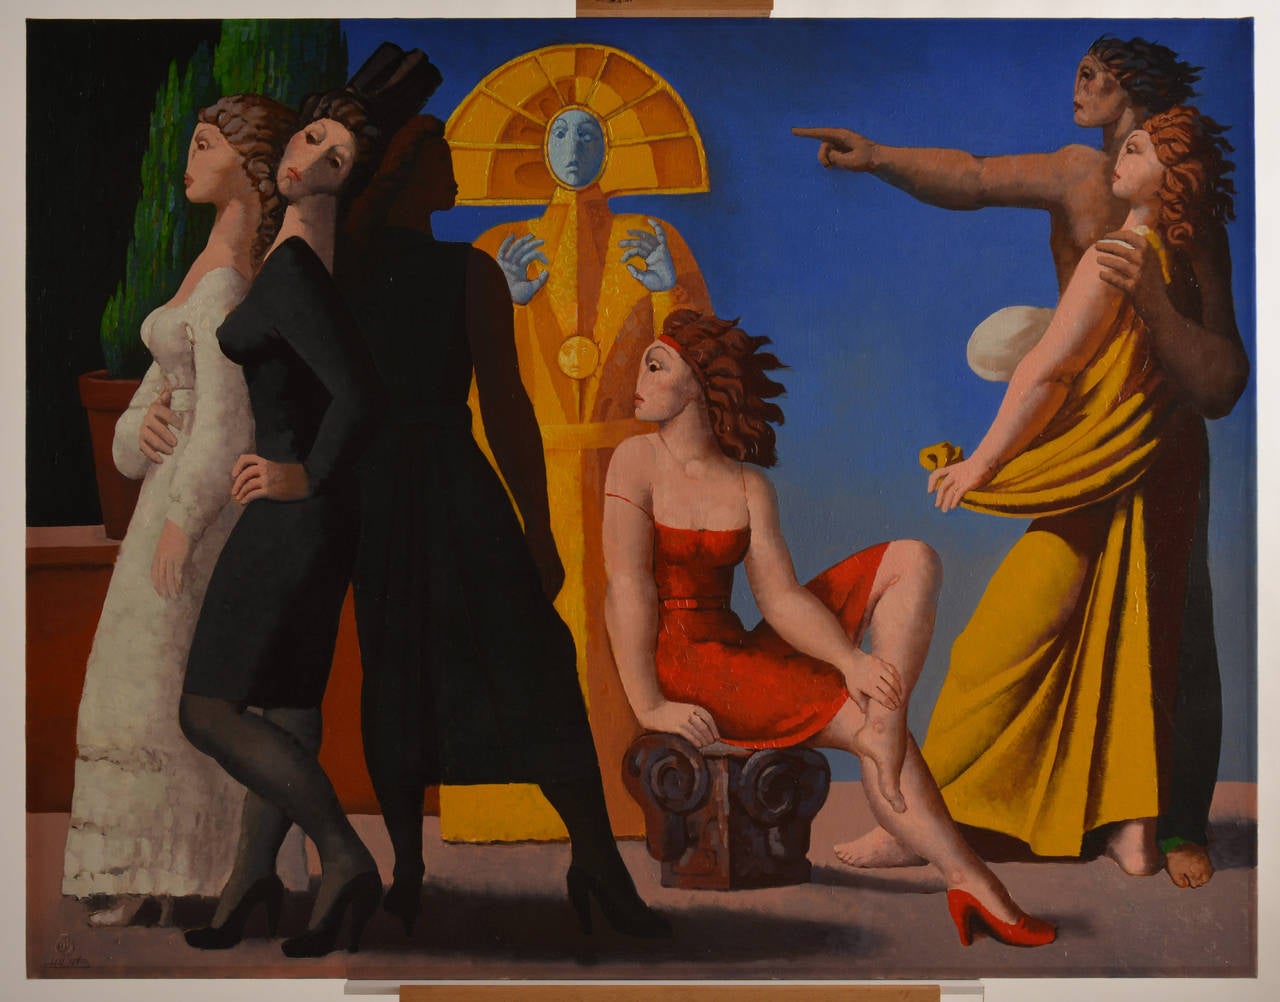 José Herrera (Spain, 1943), titled: l'evènement du printemps, signed with monogram bottom left and in verso, 1993, oil on canvas, Dimensions: 146 x 114.